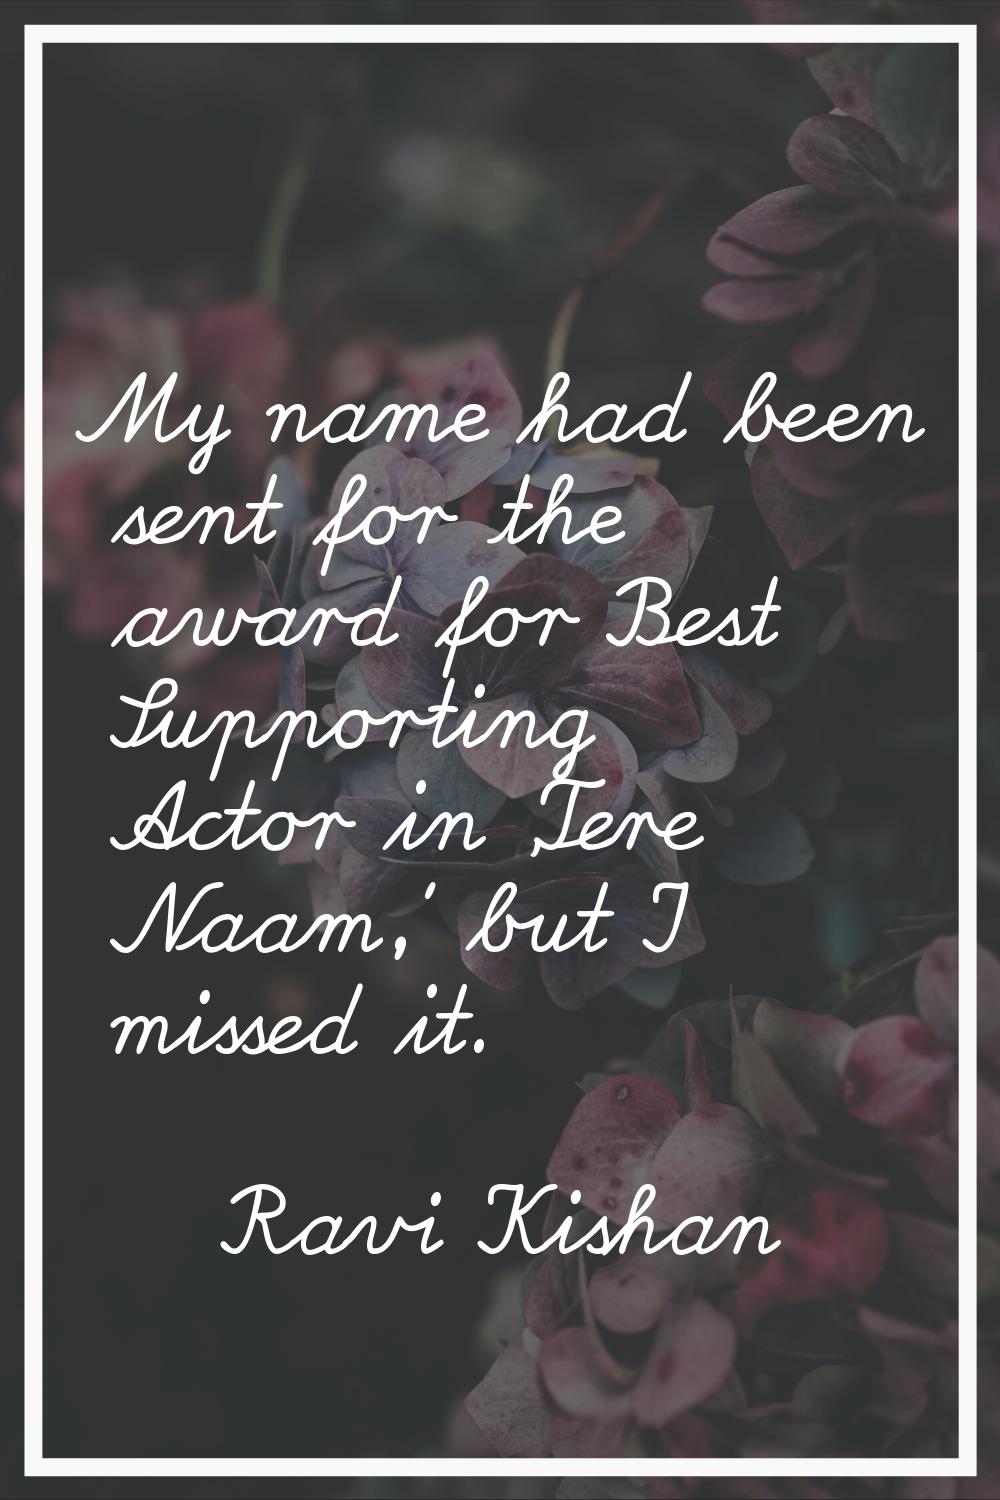 My name had been sent for the award for Best Supporting Actor in 'Tere Naam,' but I missed it.